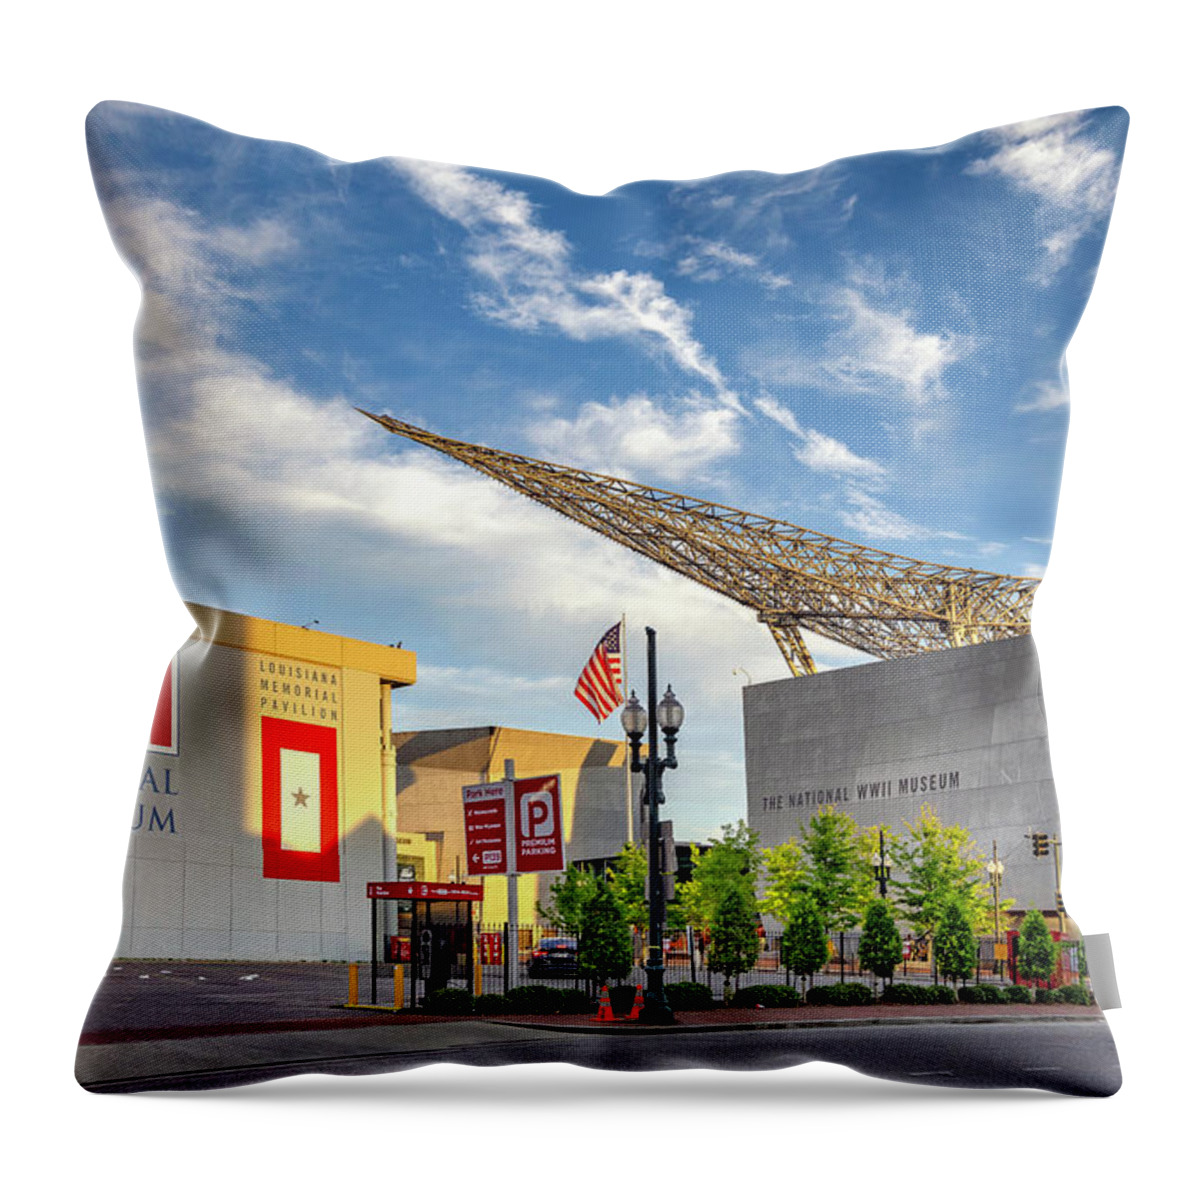 Estock Throw Pillow featuring the digital art Wwii Museum, New Orleans, La #1 by Claudia Uripos